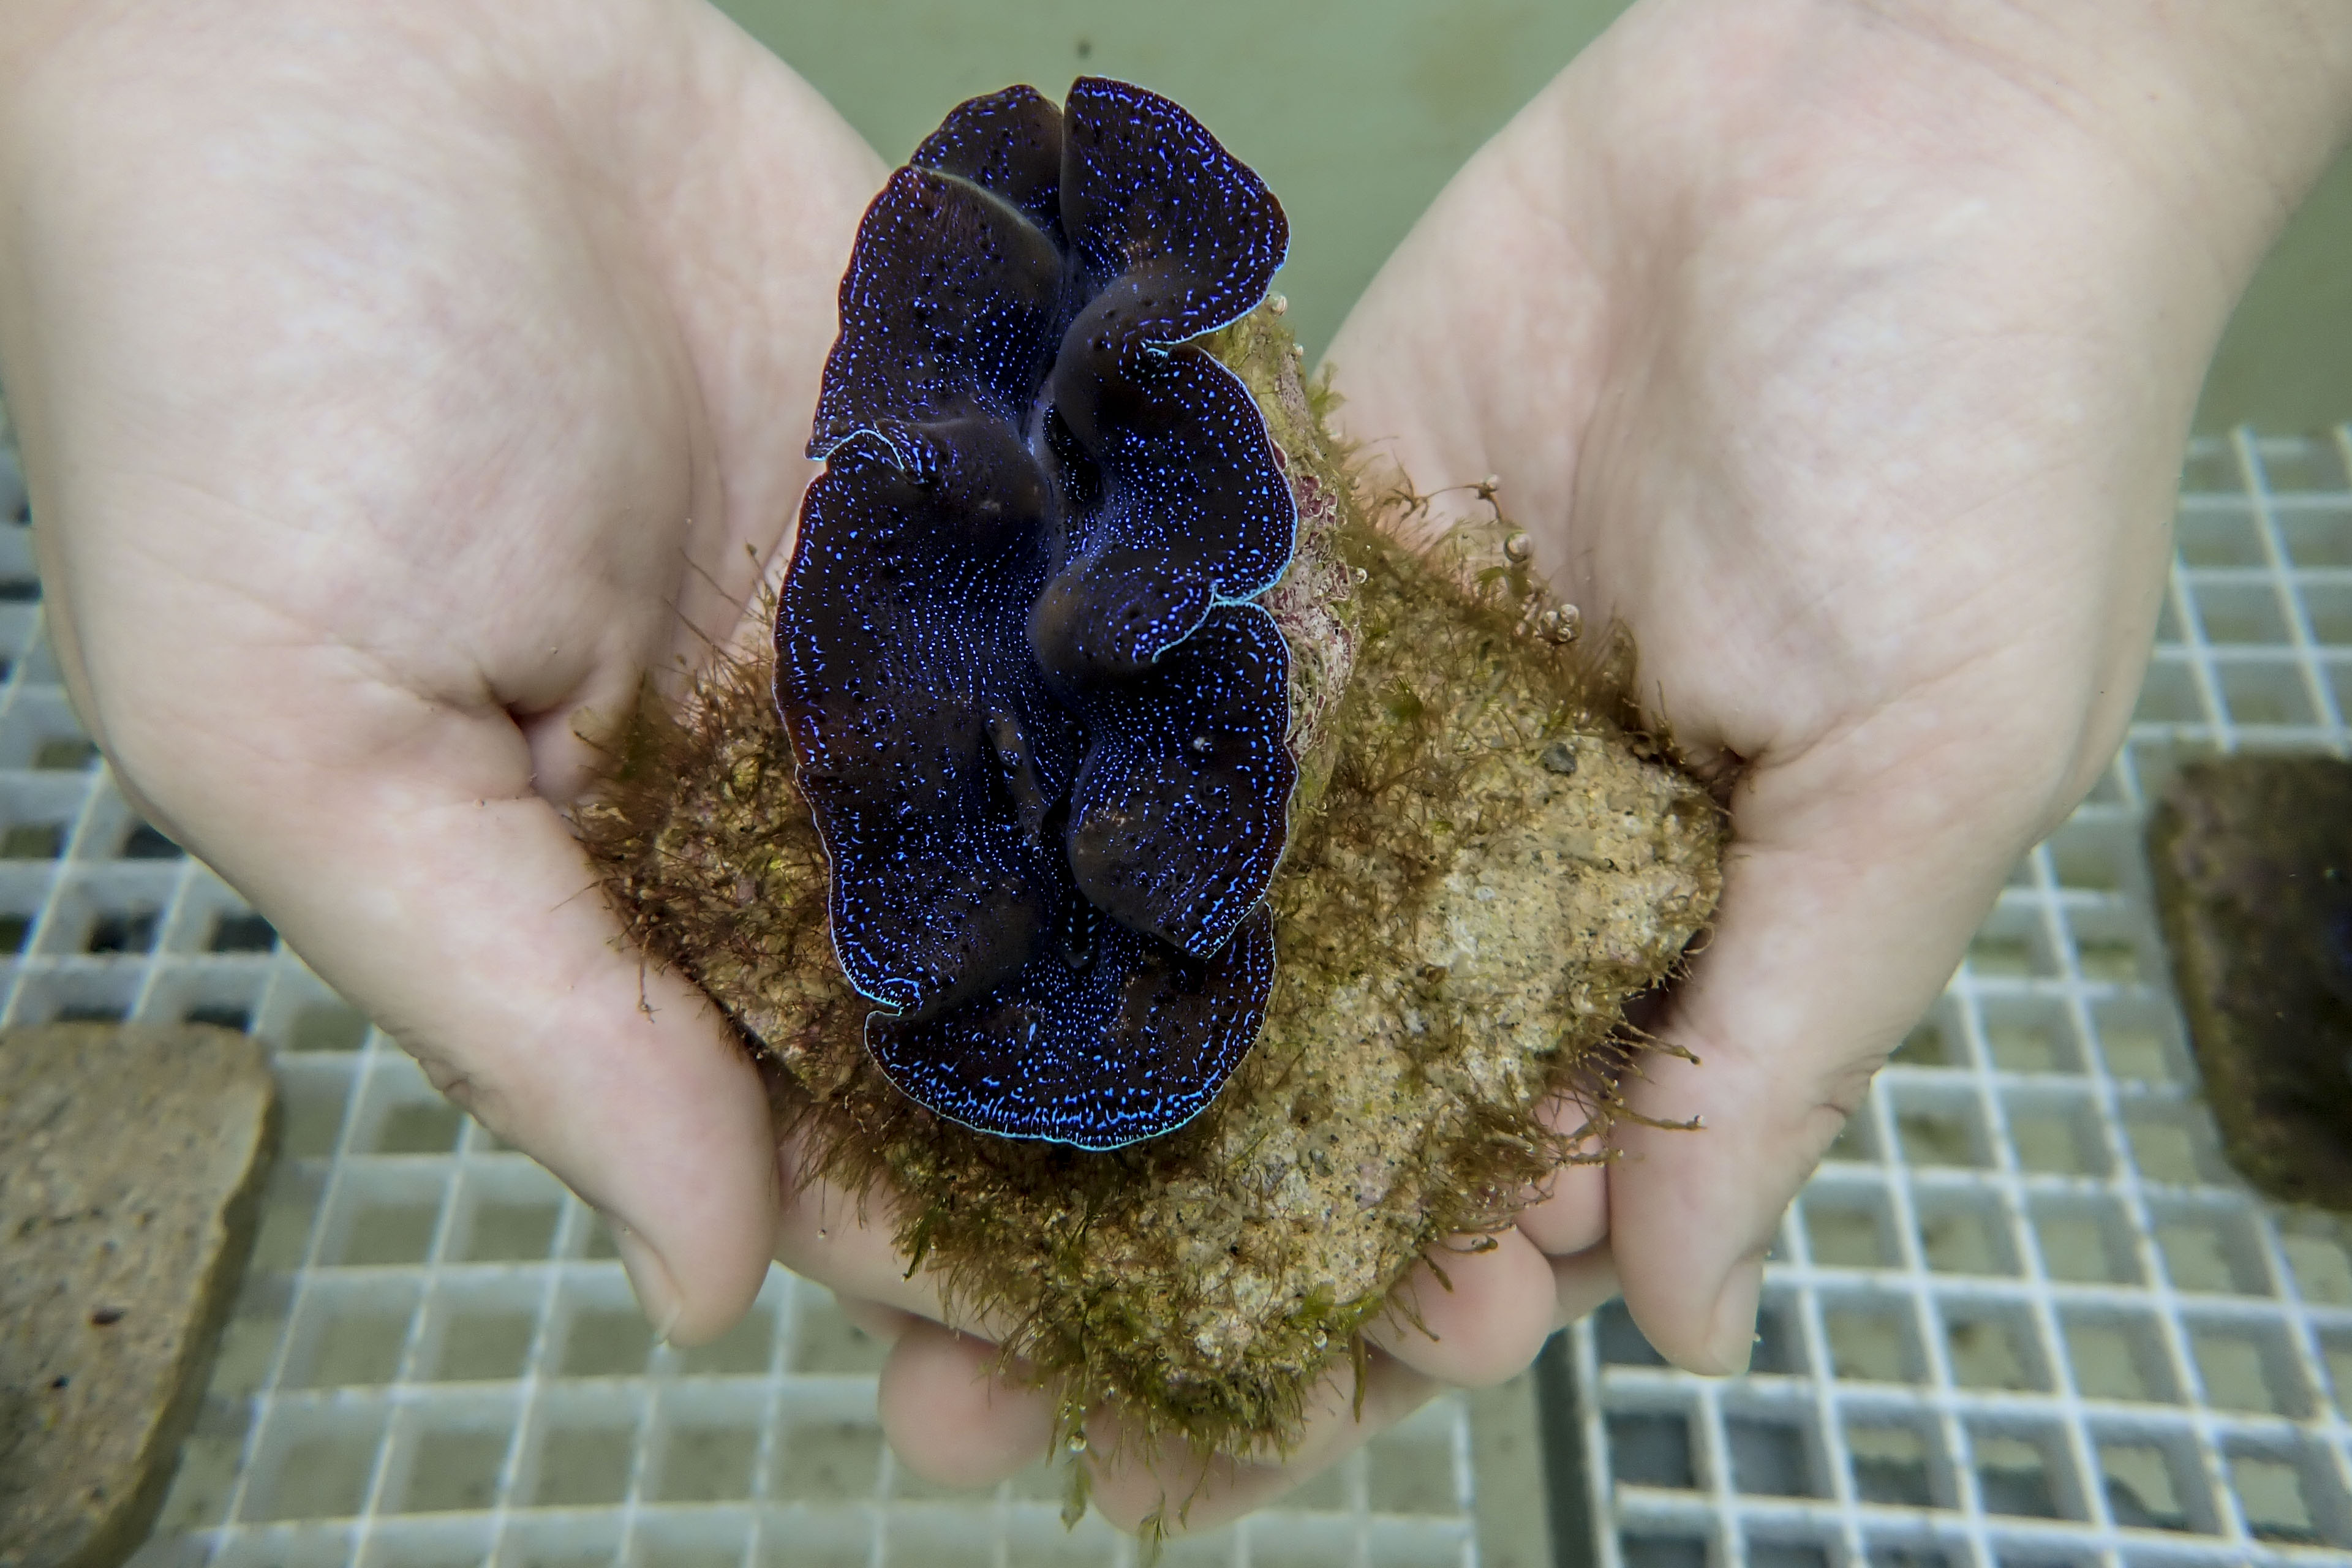 A specimen of a giant clam found in Singapore waters. PHOTO: WALLACE WOON